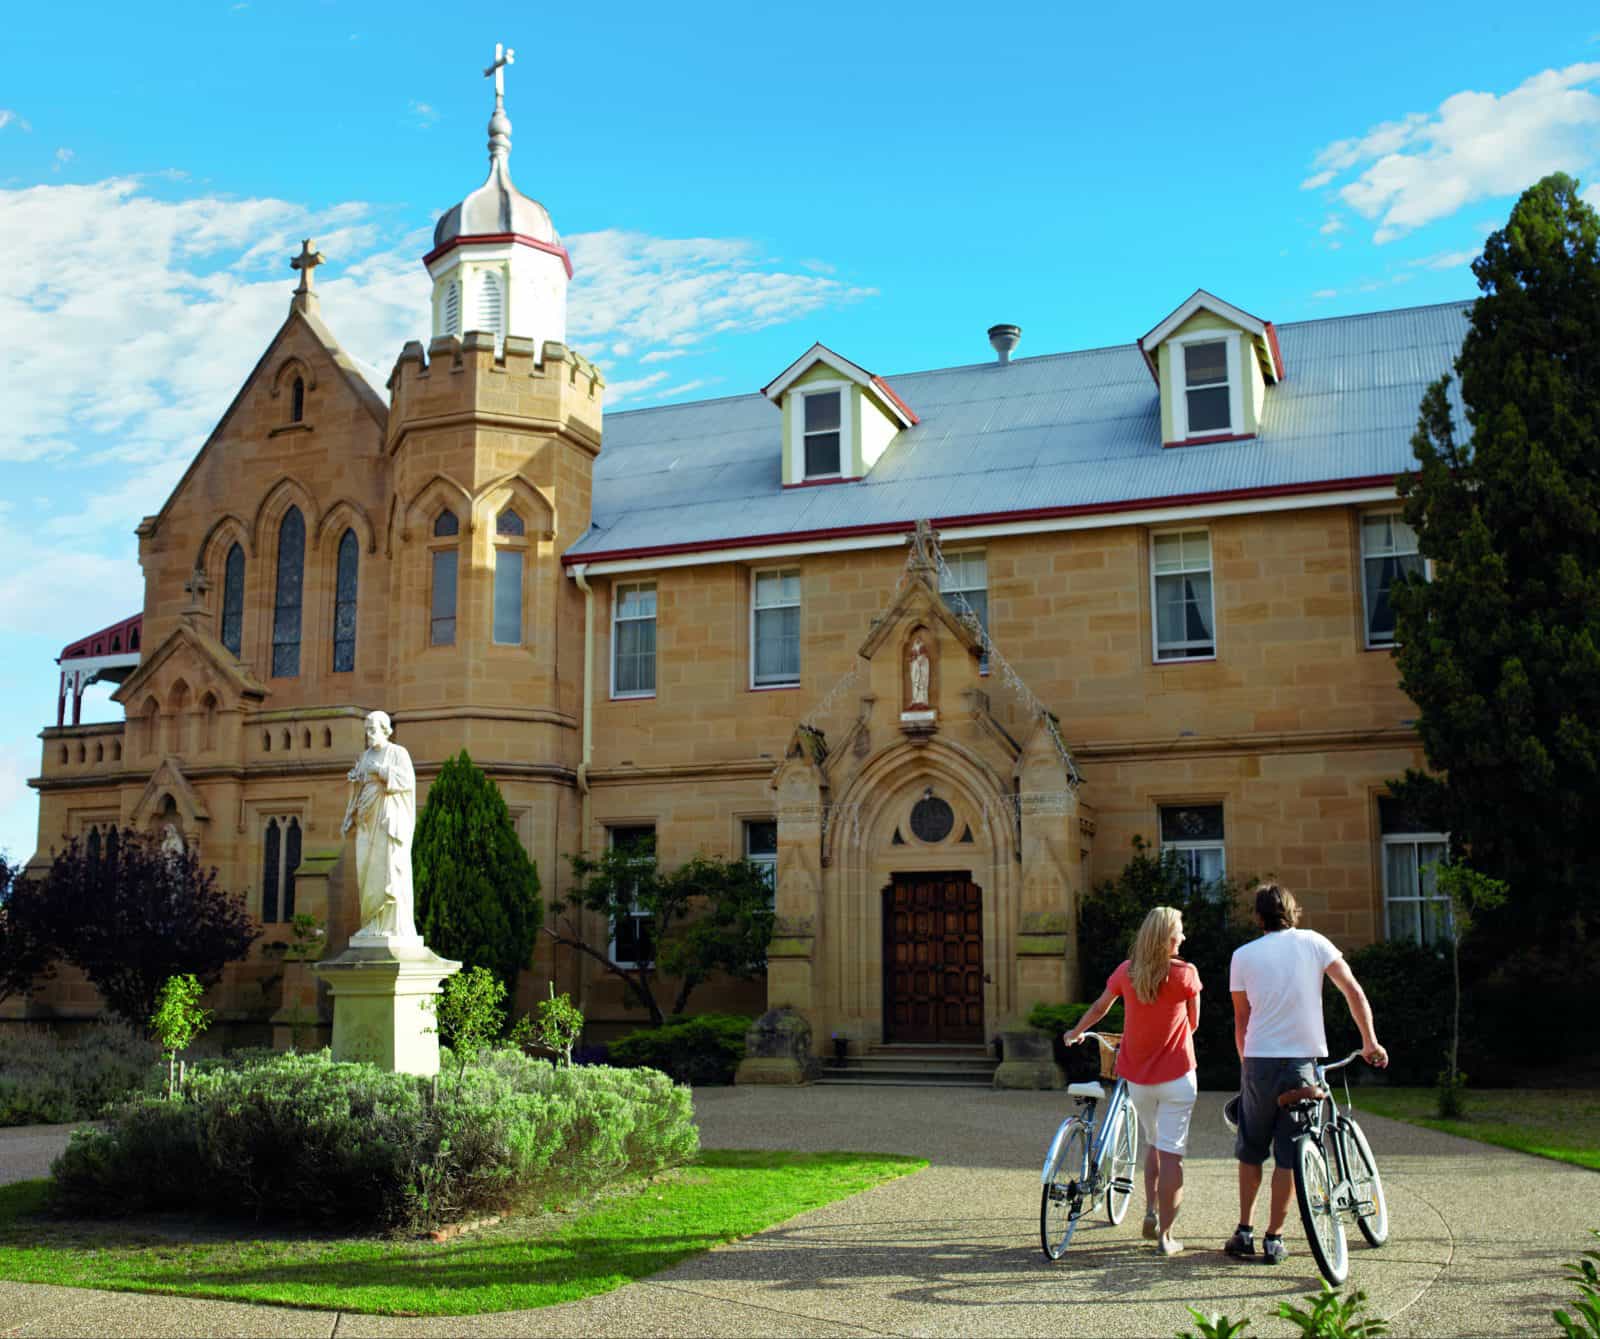 Abbey of the Roses, Warwick